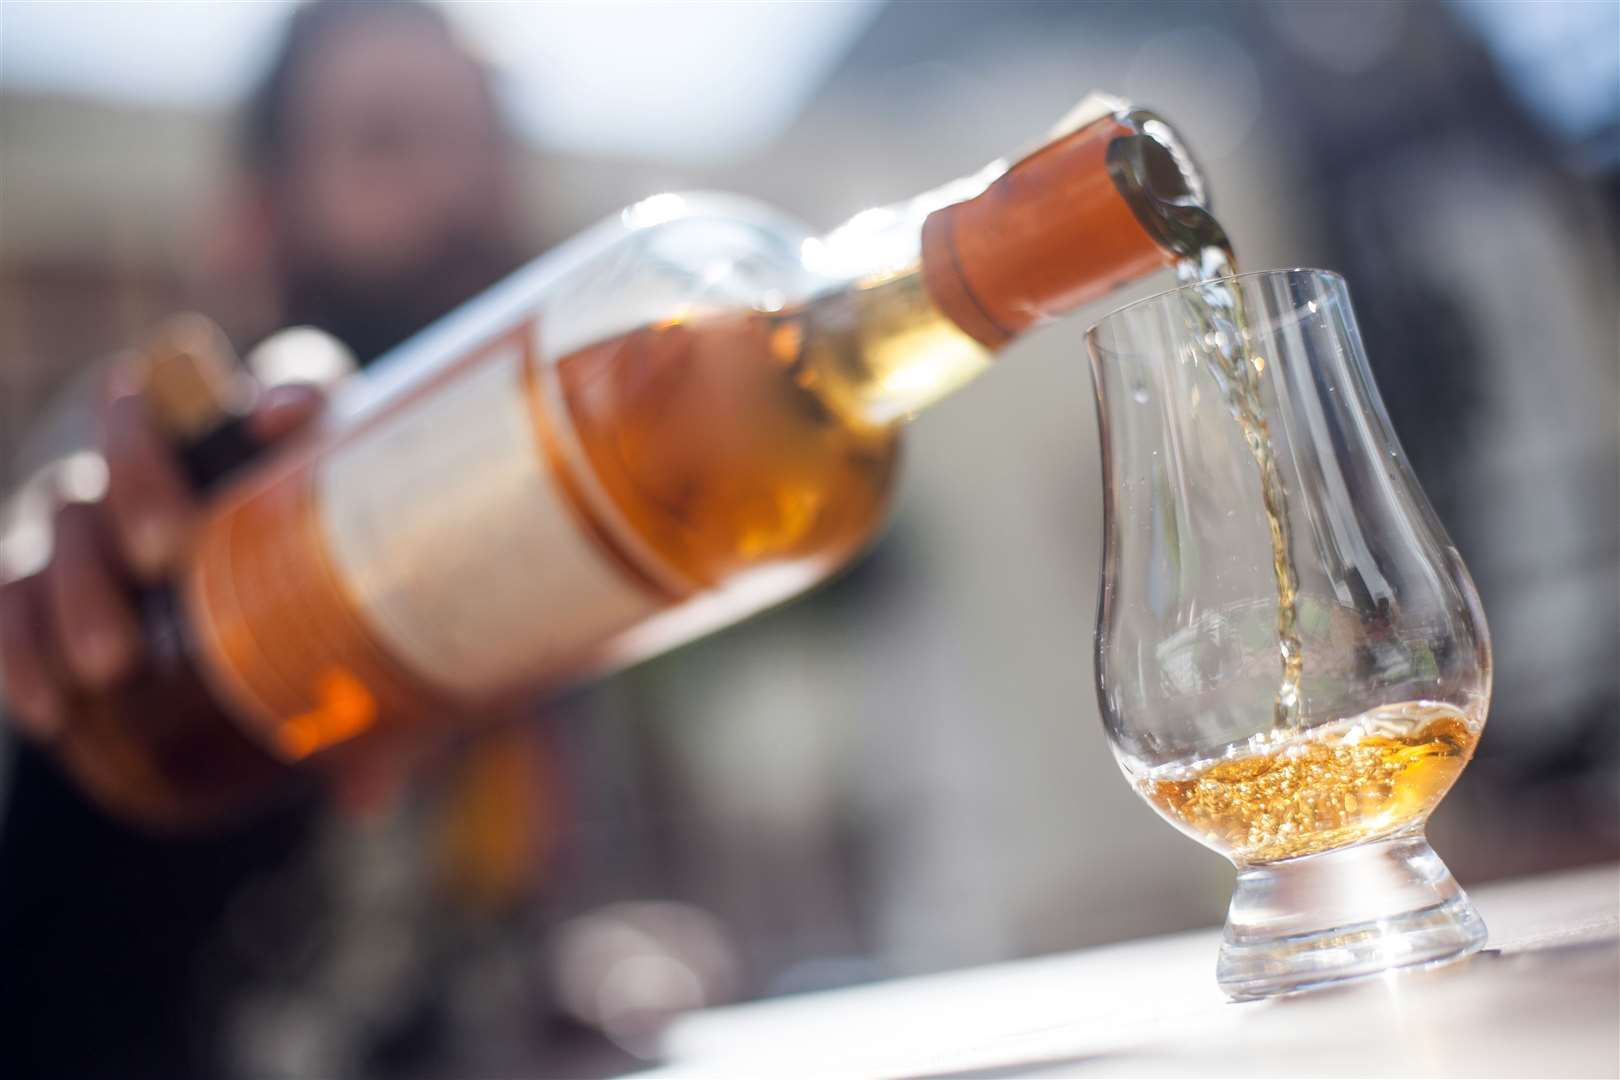 The Biden administration in the US has announced it will suspend tariffs on exports of single malt Scotch whisky from the UK for four months.